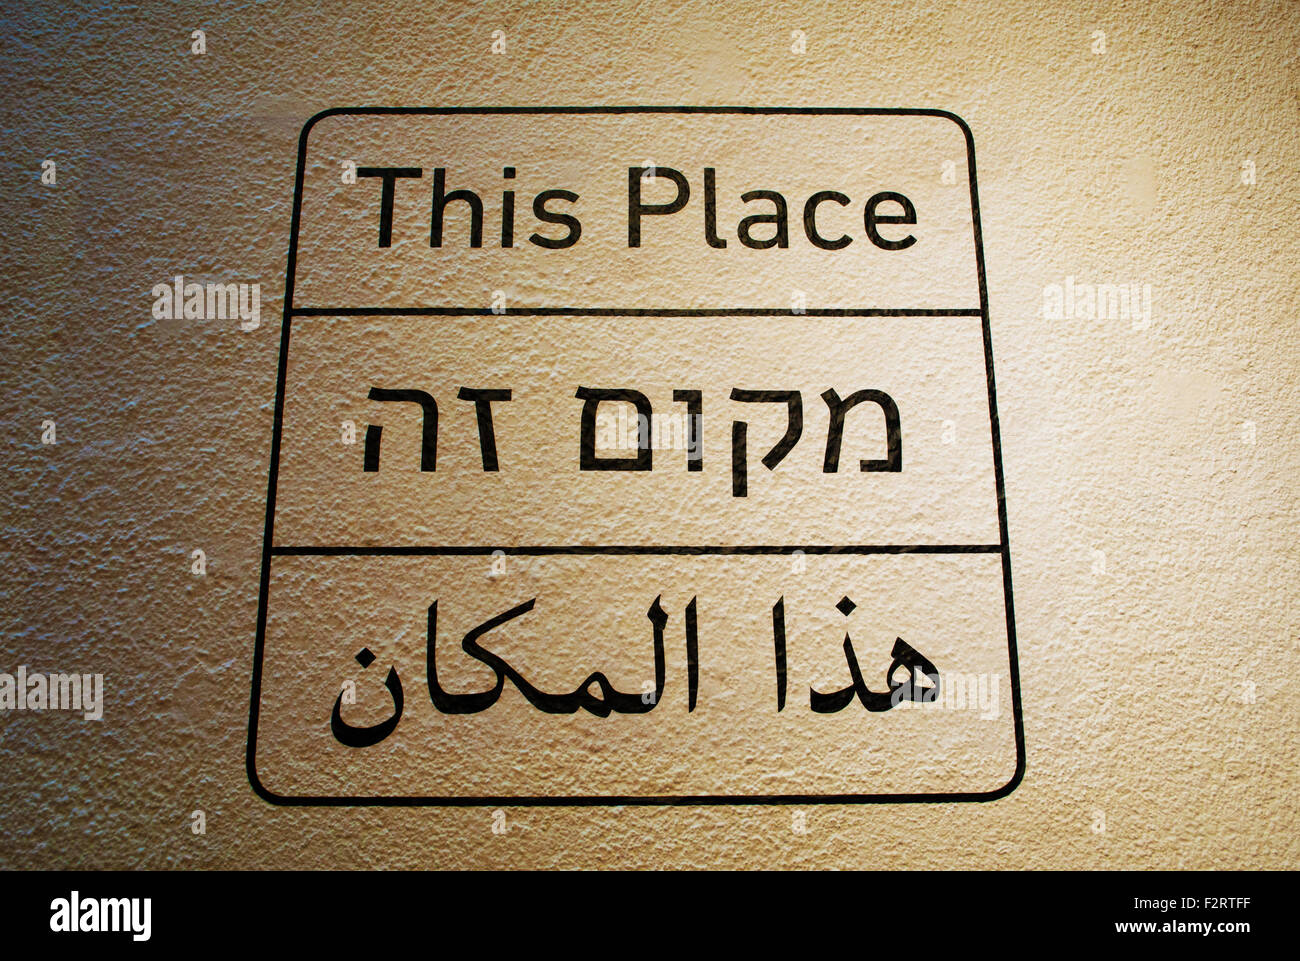 Tel Aviv Museum of Art, contemporary art, Yafo, Israel, sign, signal, indication, This Place sign in Hebrew, English and Arabic Stock Photo